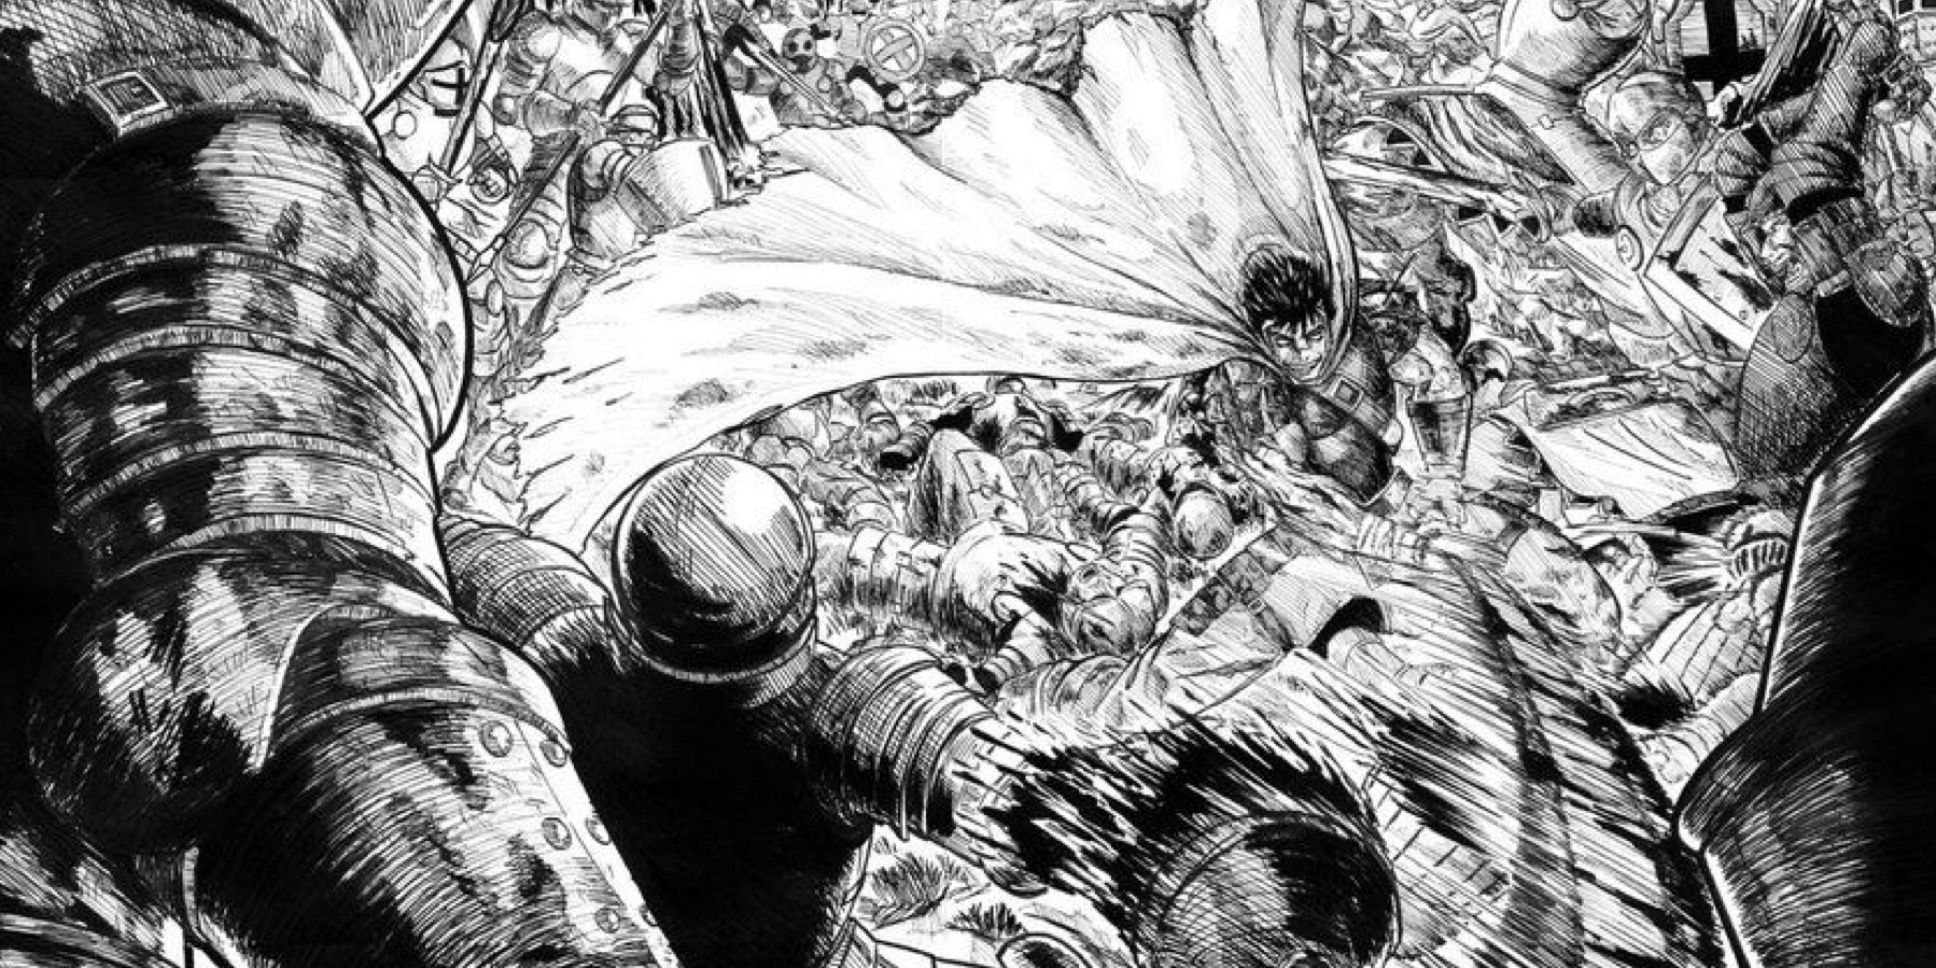 Guts earning his title of the hundred man slayer in Berserk